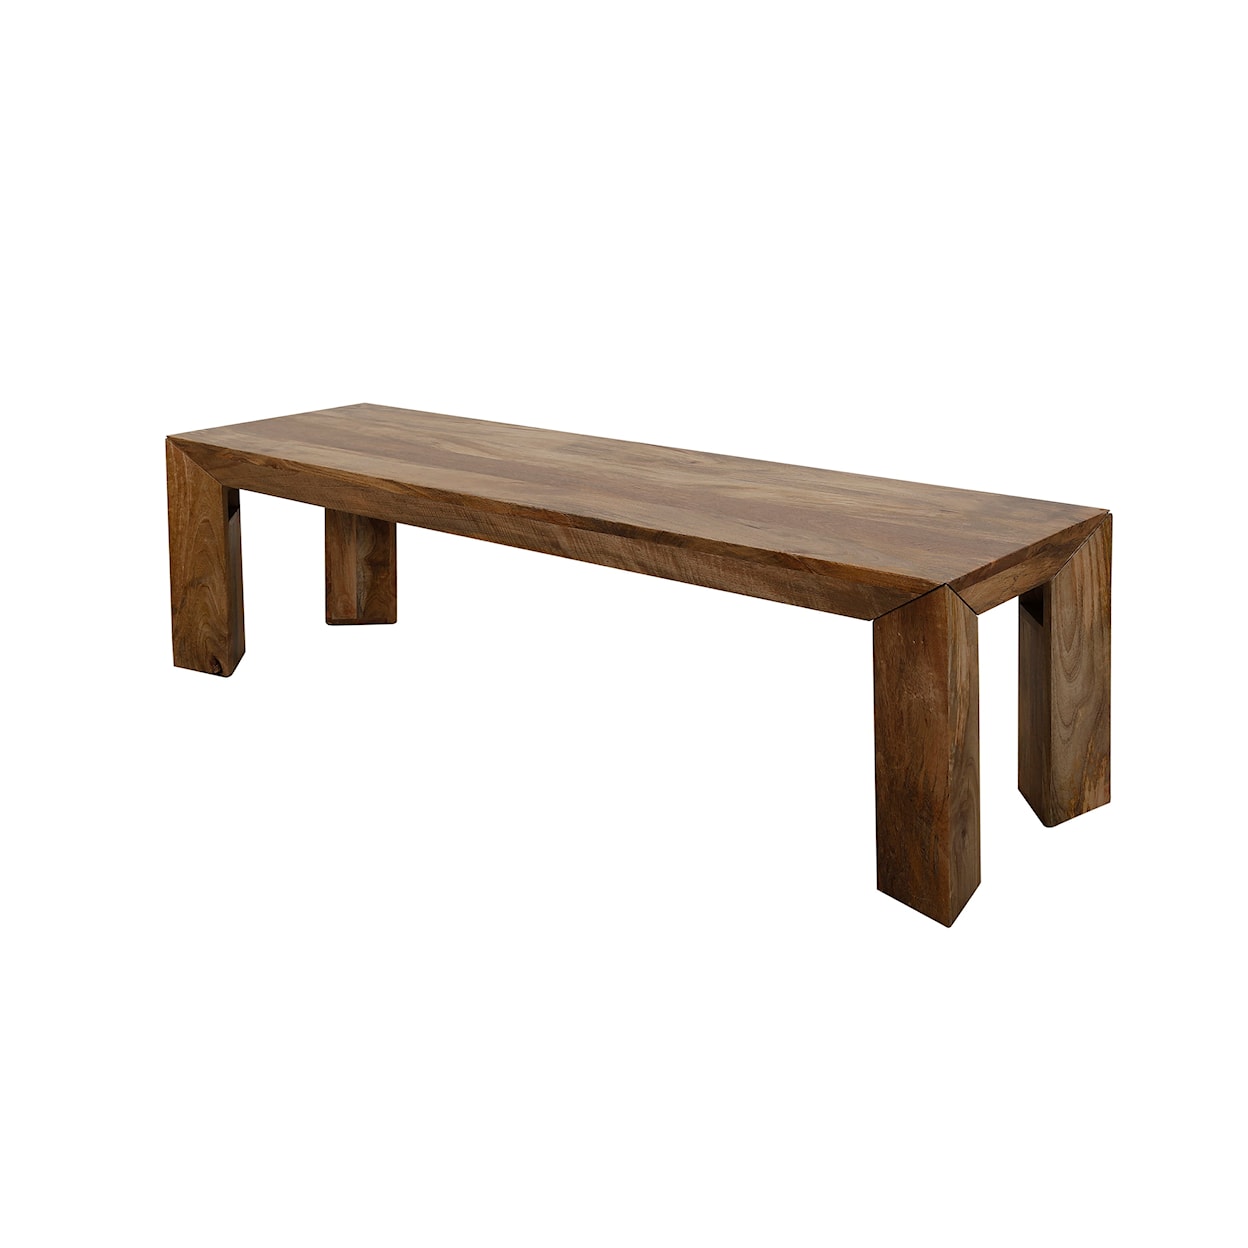 Paramount Furniture Crossings Downtown Dining Bench